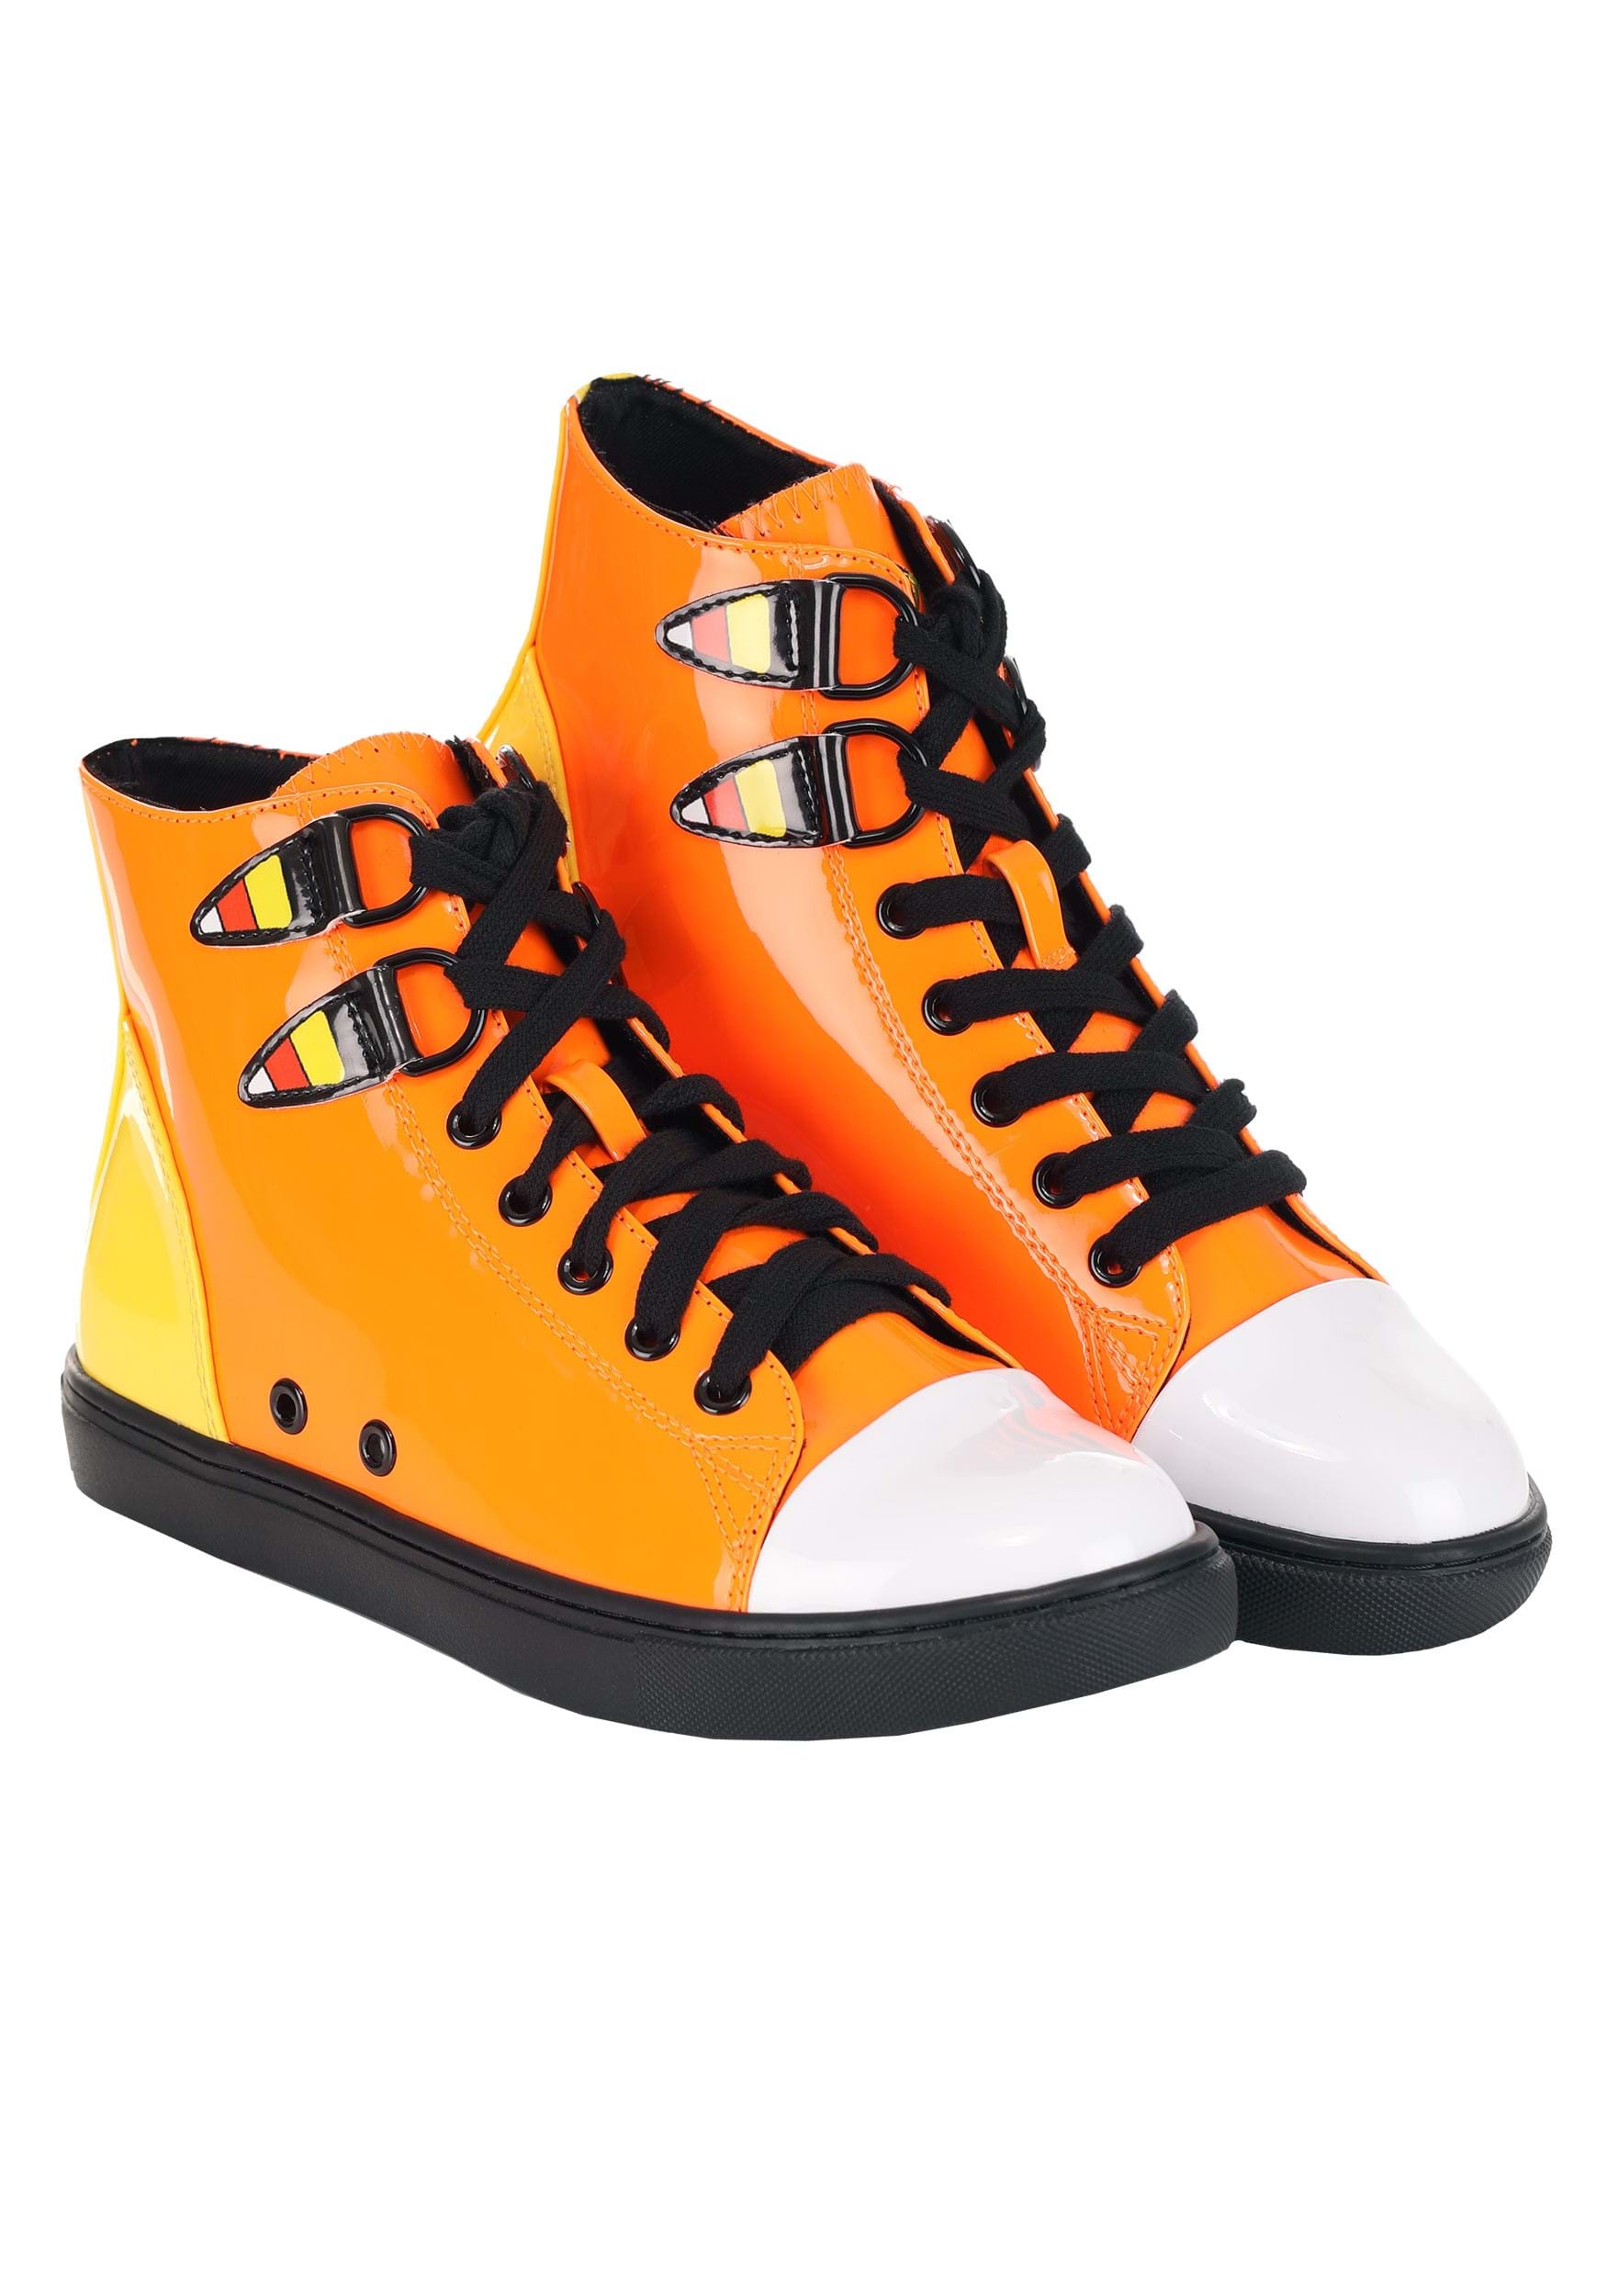 Image of Candy Corn Chelsea Patent High Top Sneakers ID SVCHELSEA-CORN-10